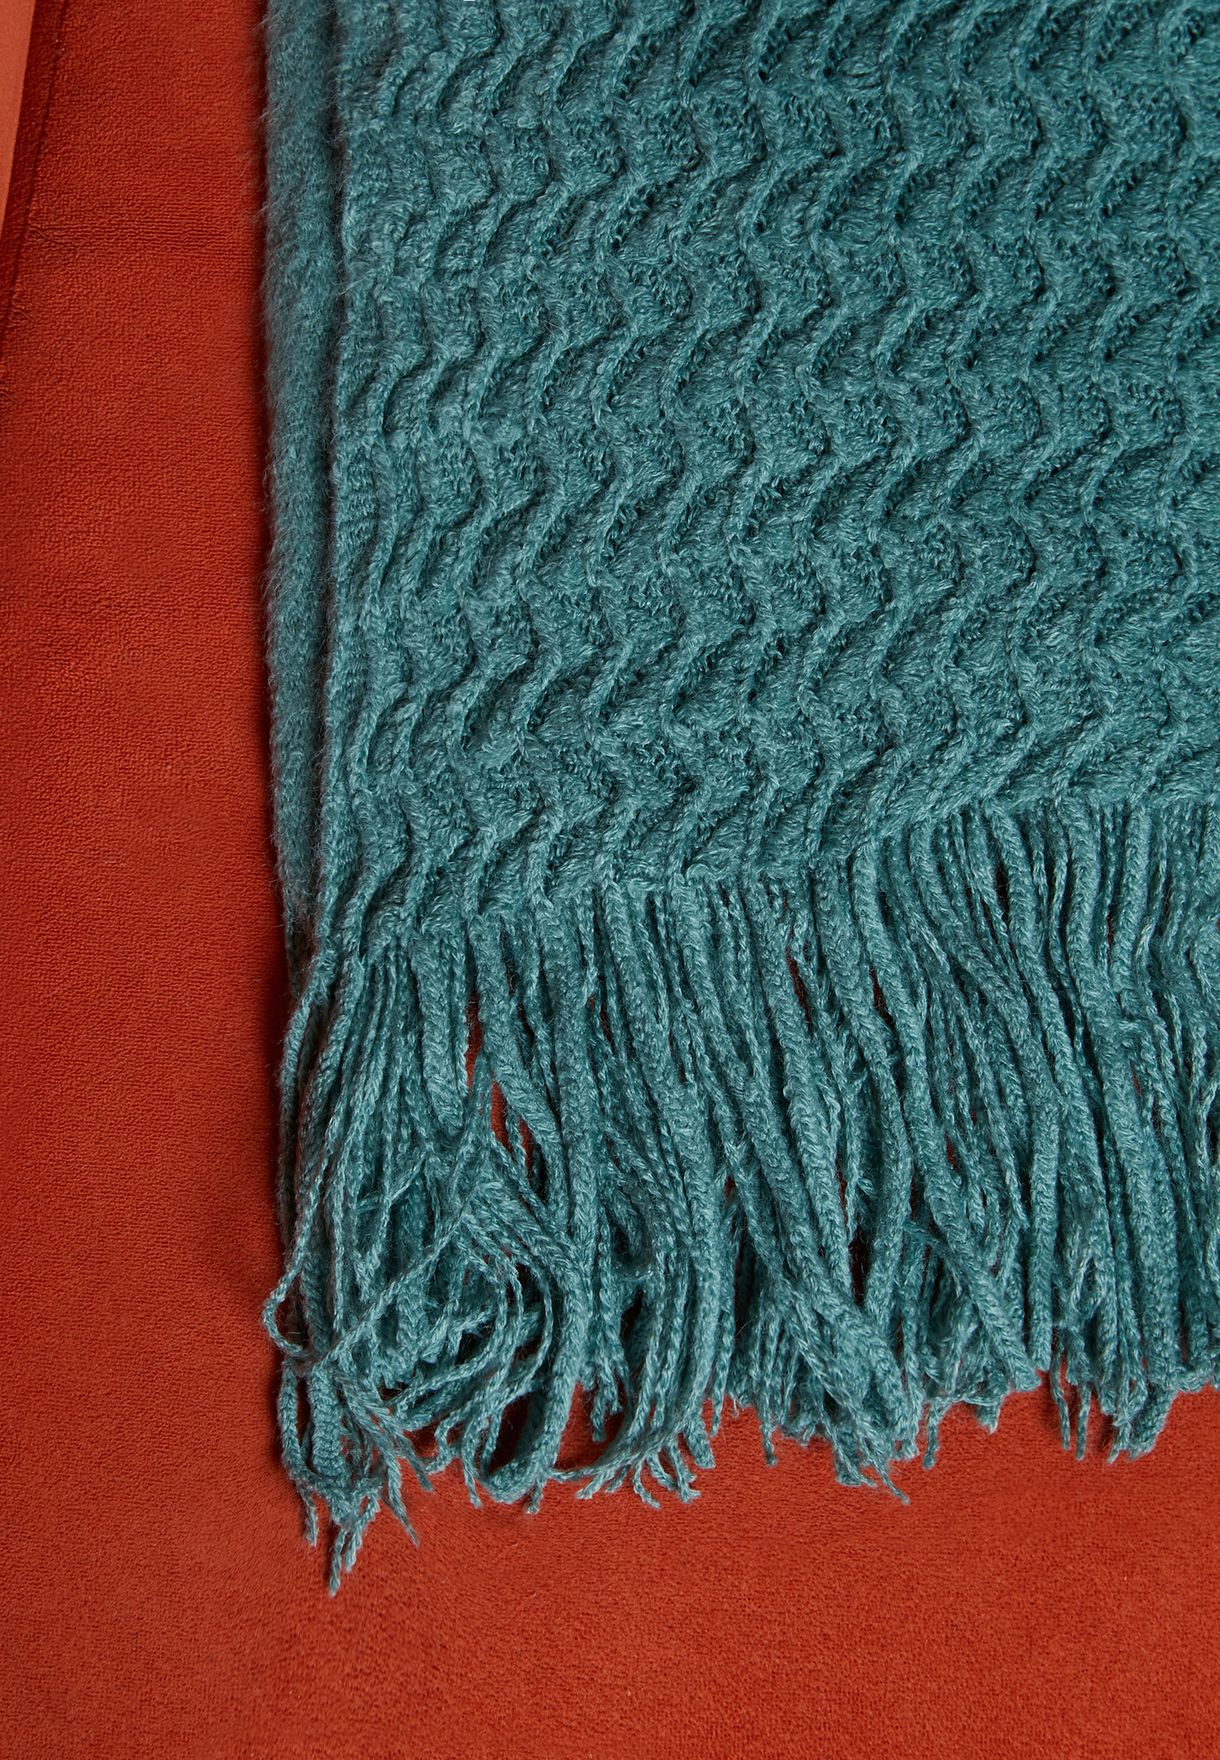 Teal Knitted Blanket 130X170Cm